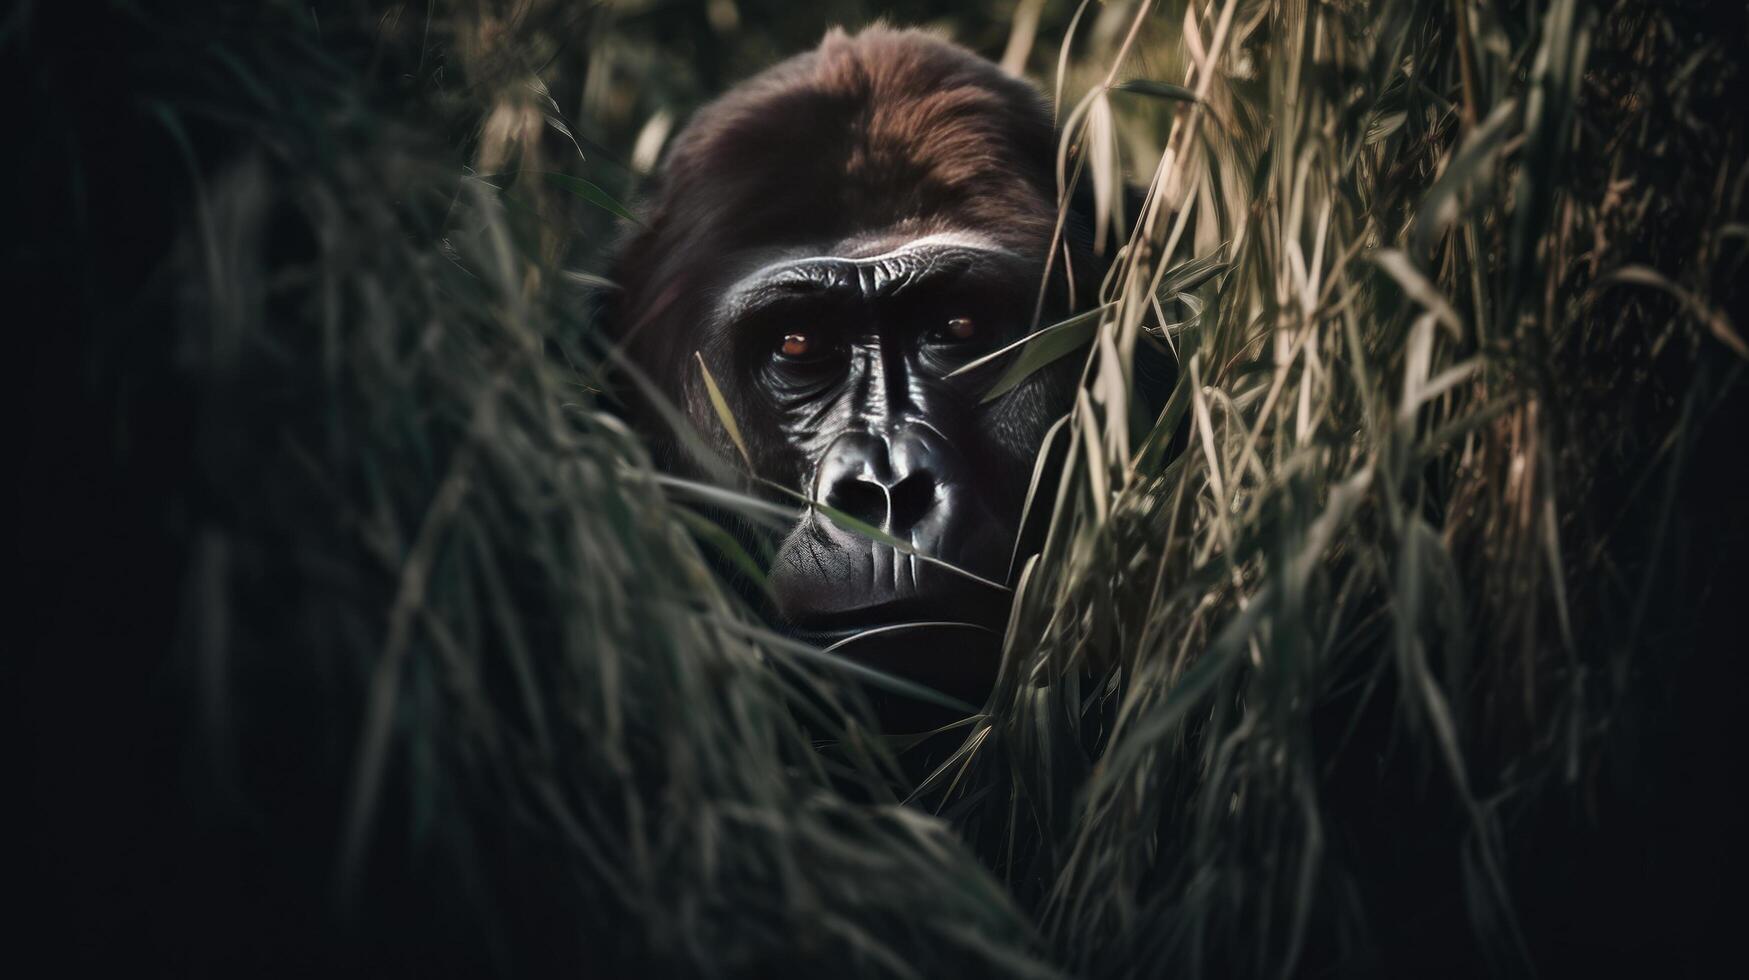 Giant gorilla hiding in the weeds Illustration photo